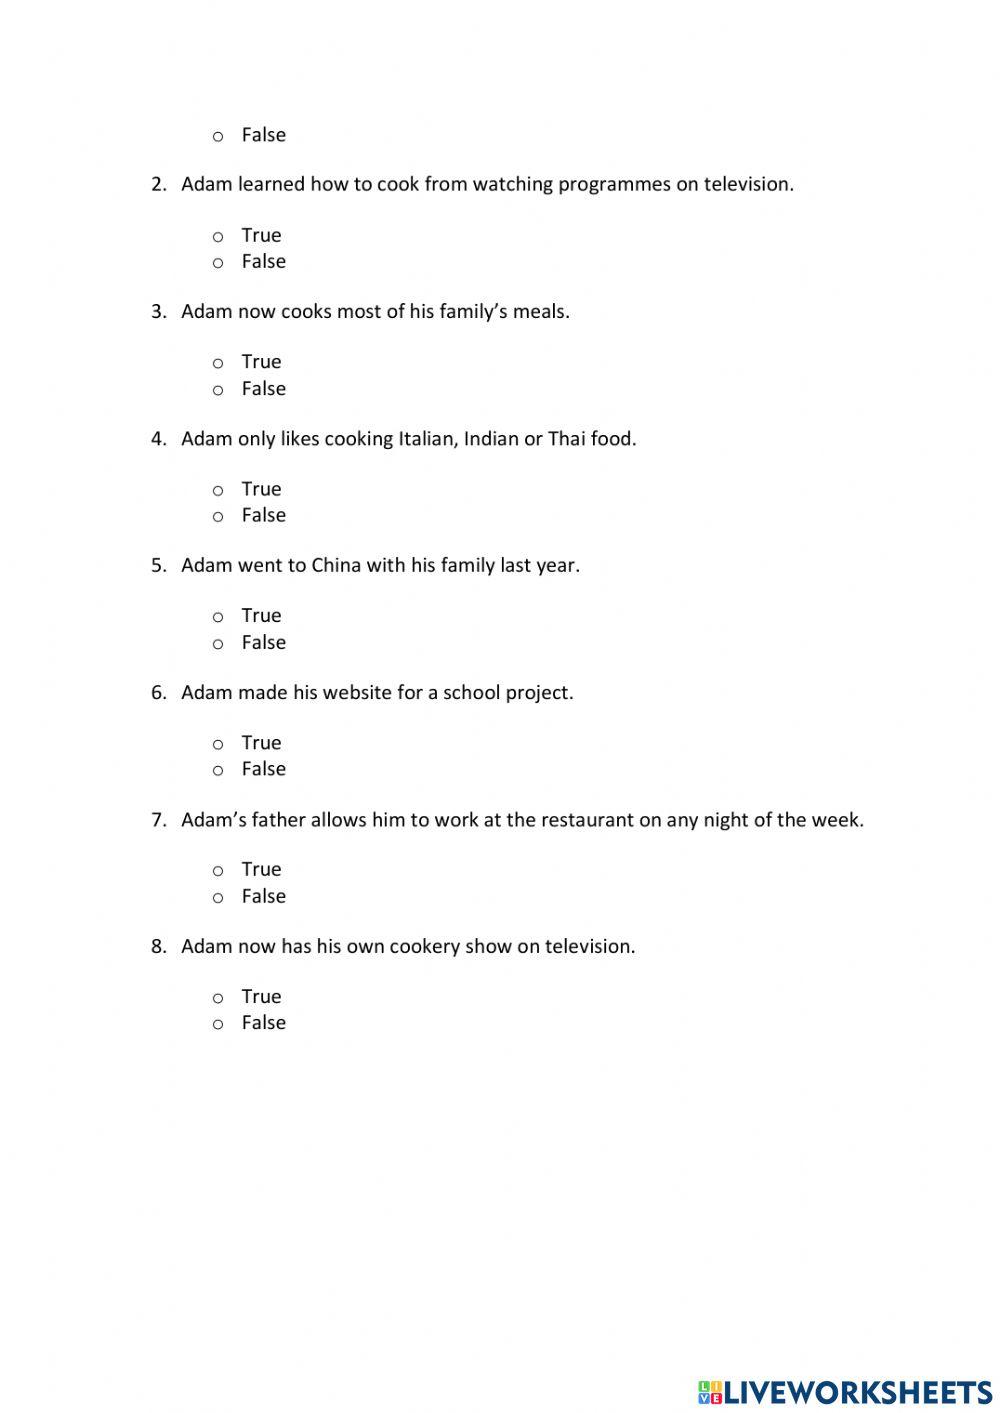 IE0, Unit 3, Reading and Writing, Exercise 5